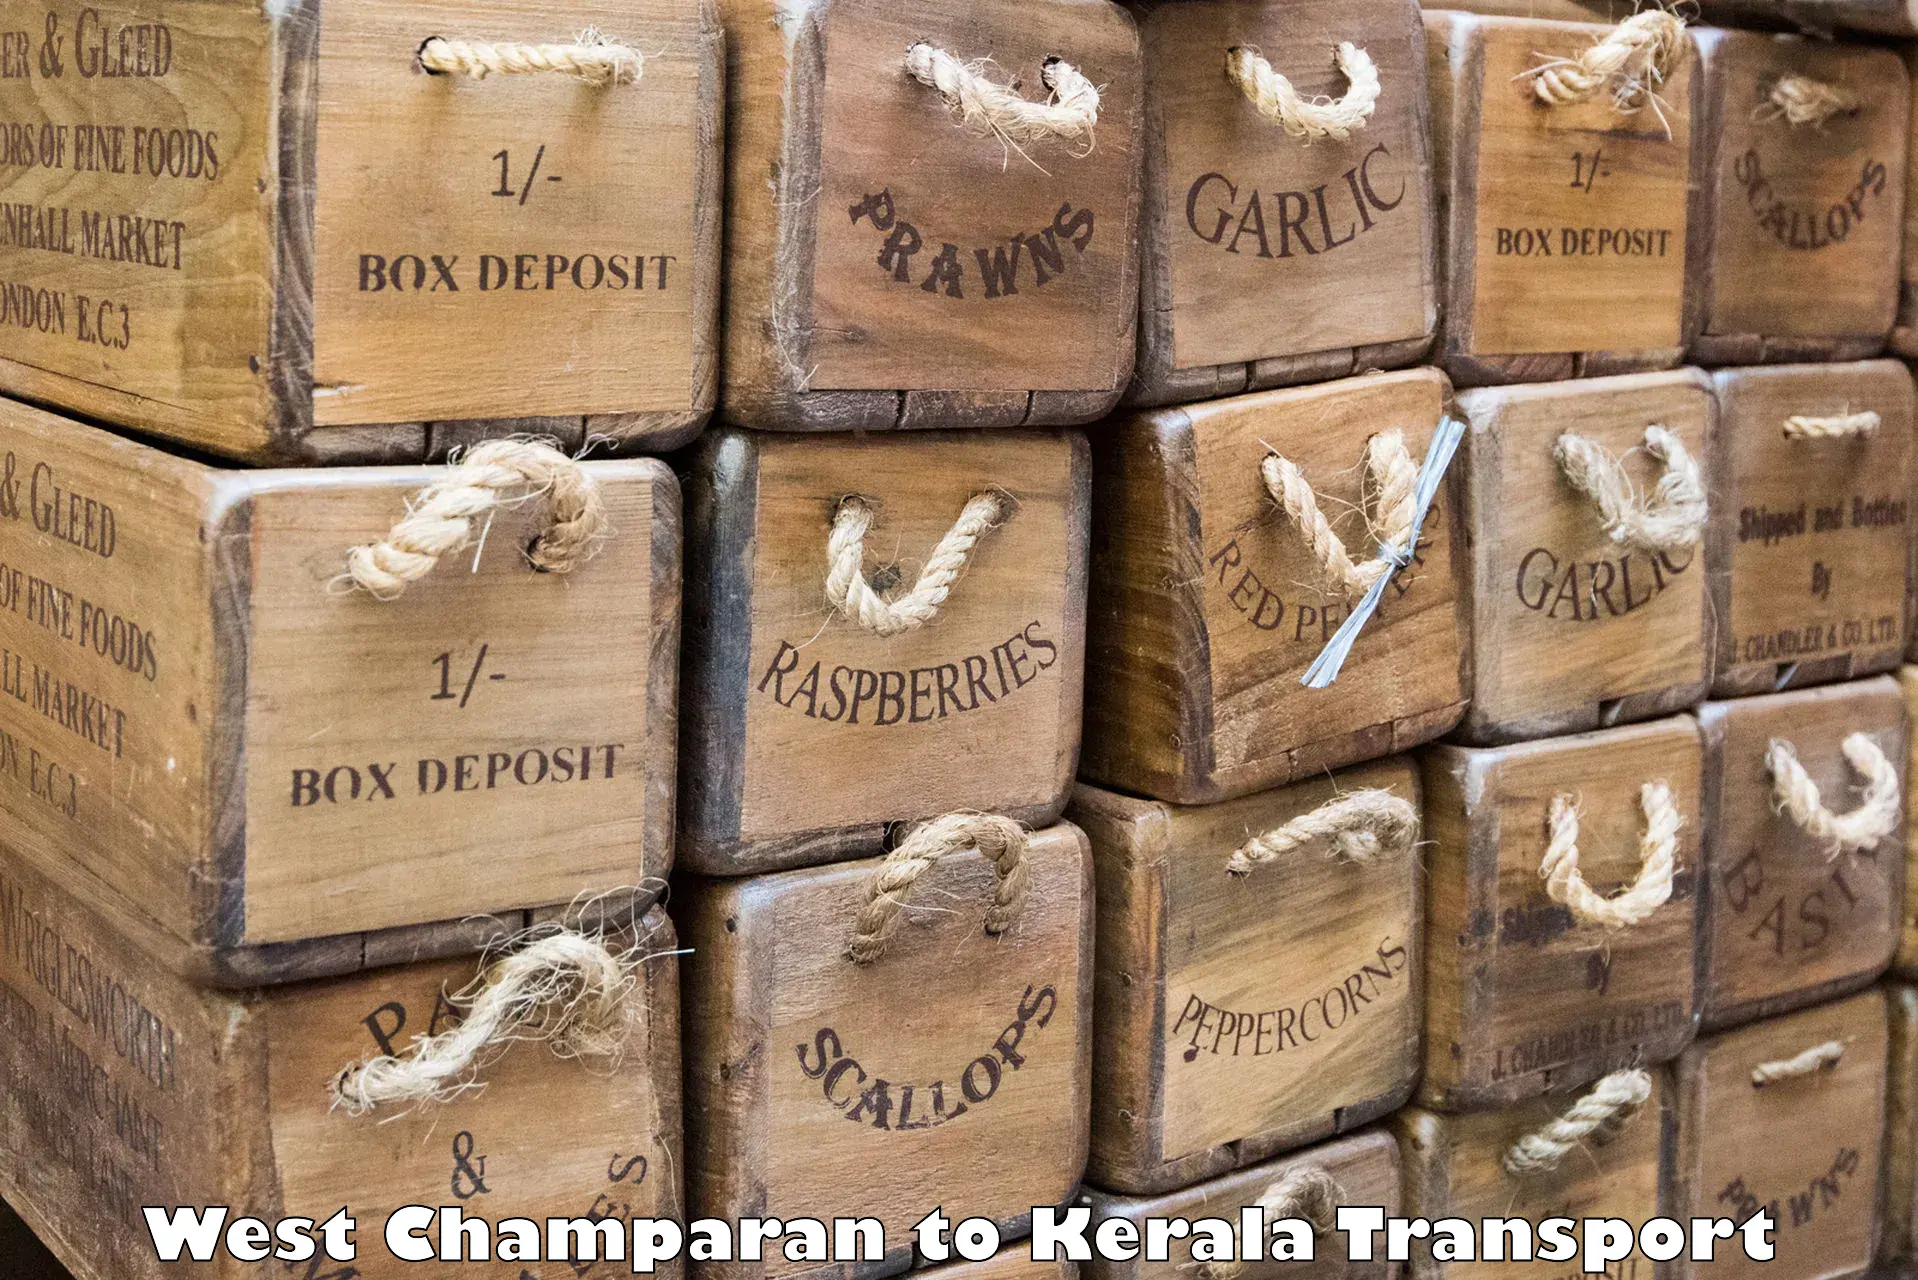 Air freight transport services West Champaran to Guruvayoor